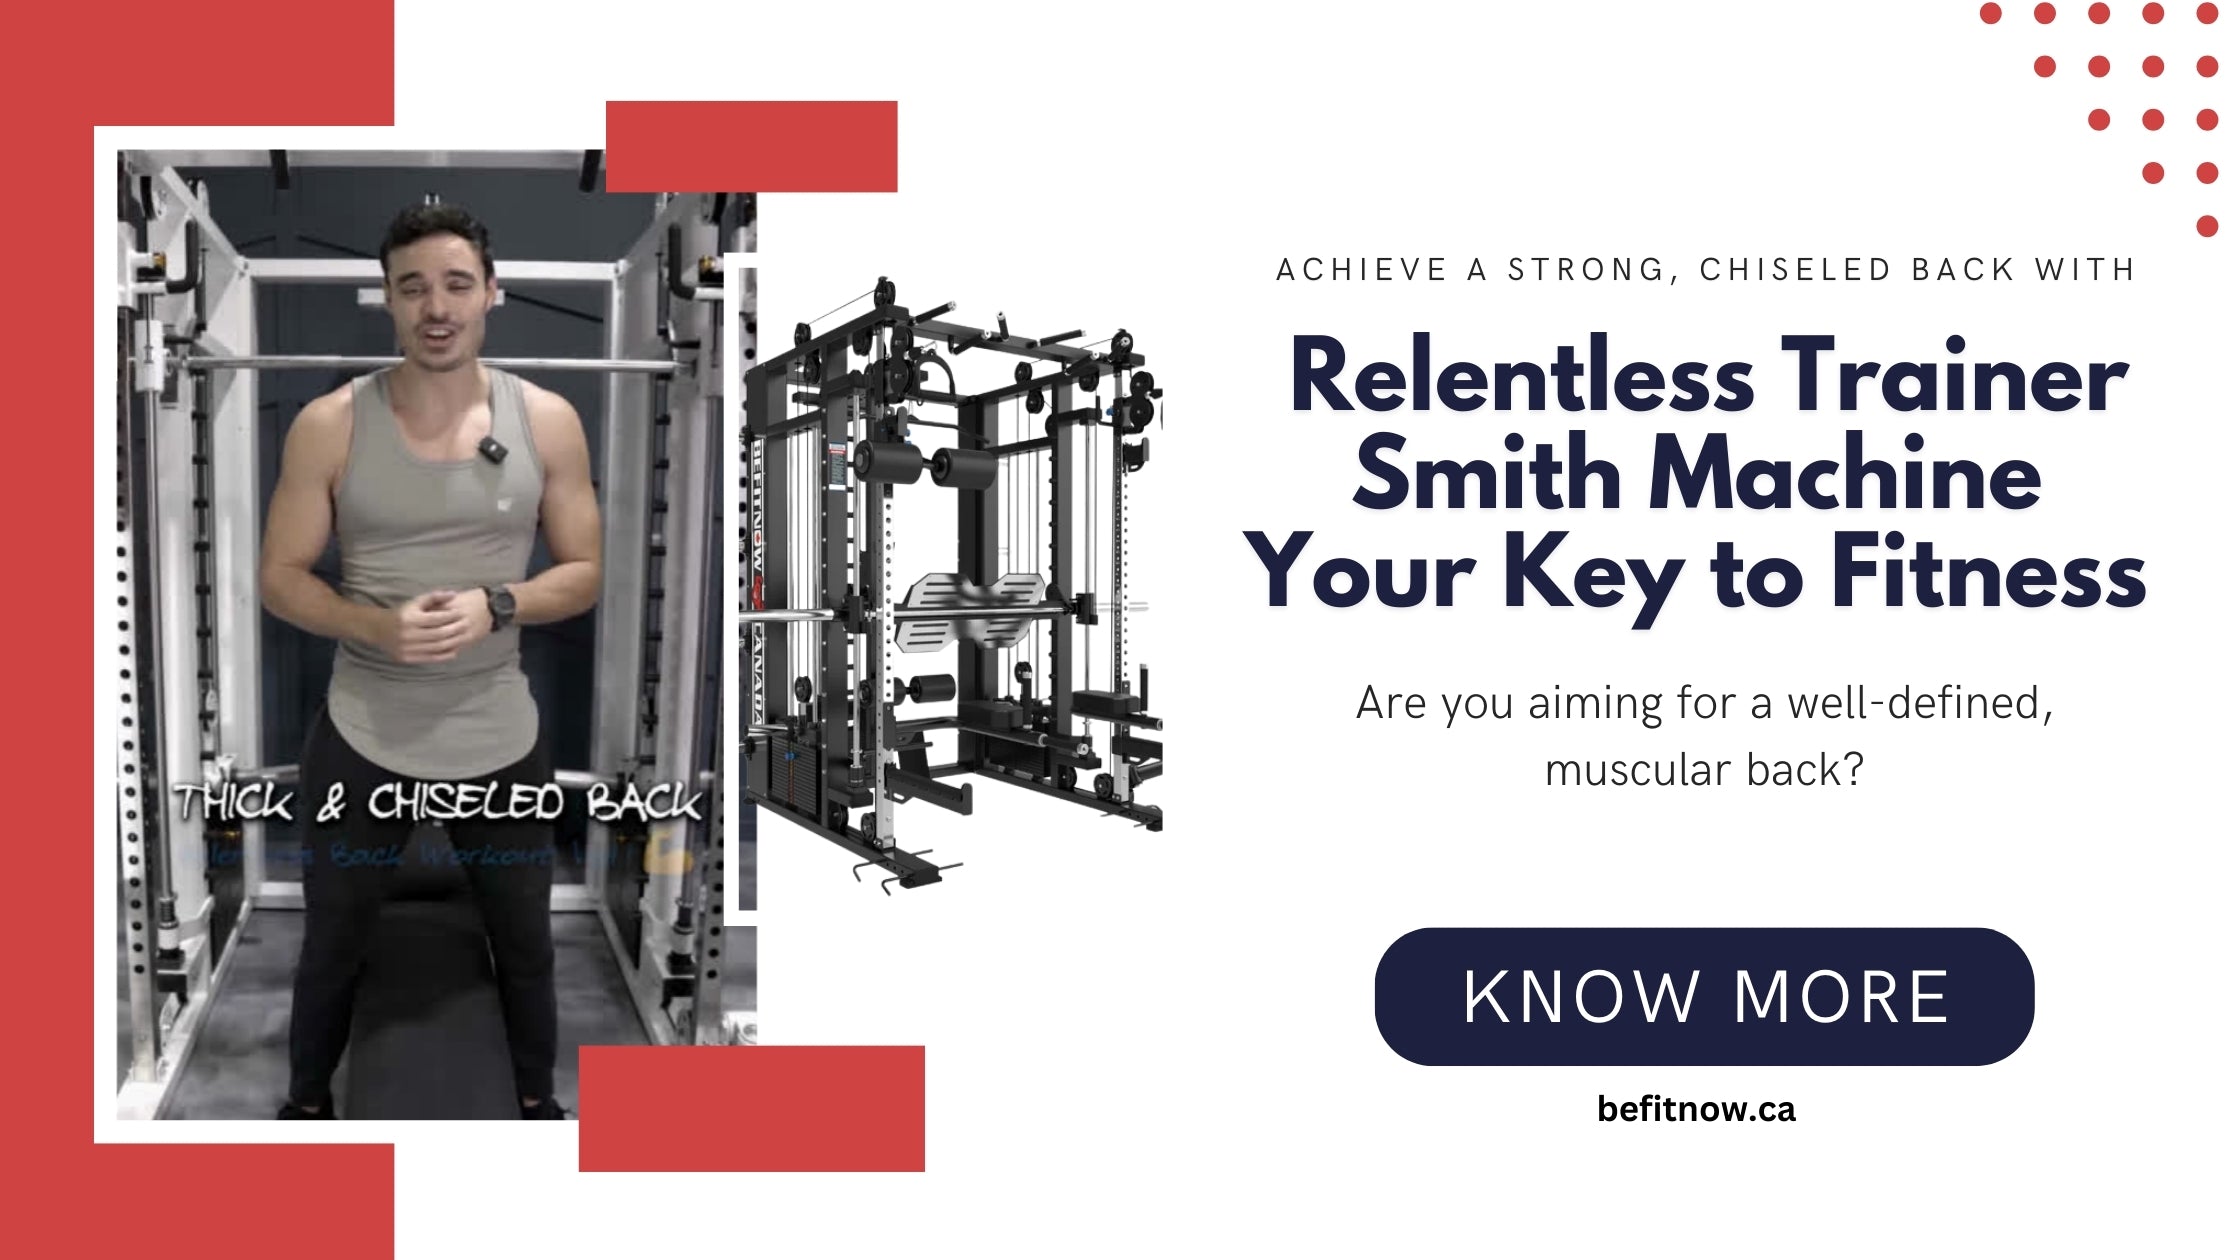 Achieve a Chiseled Back with Relentless Trainer Smith Machine